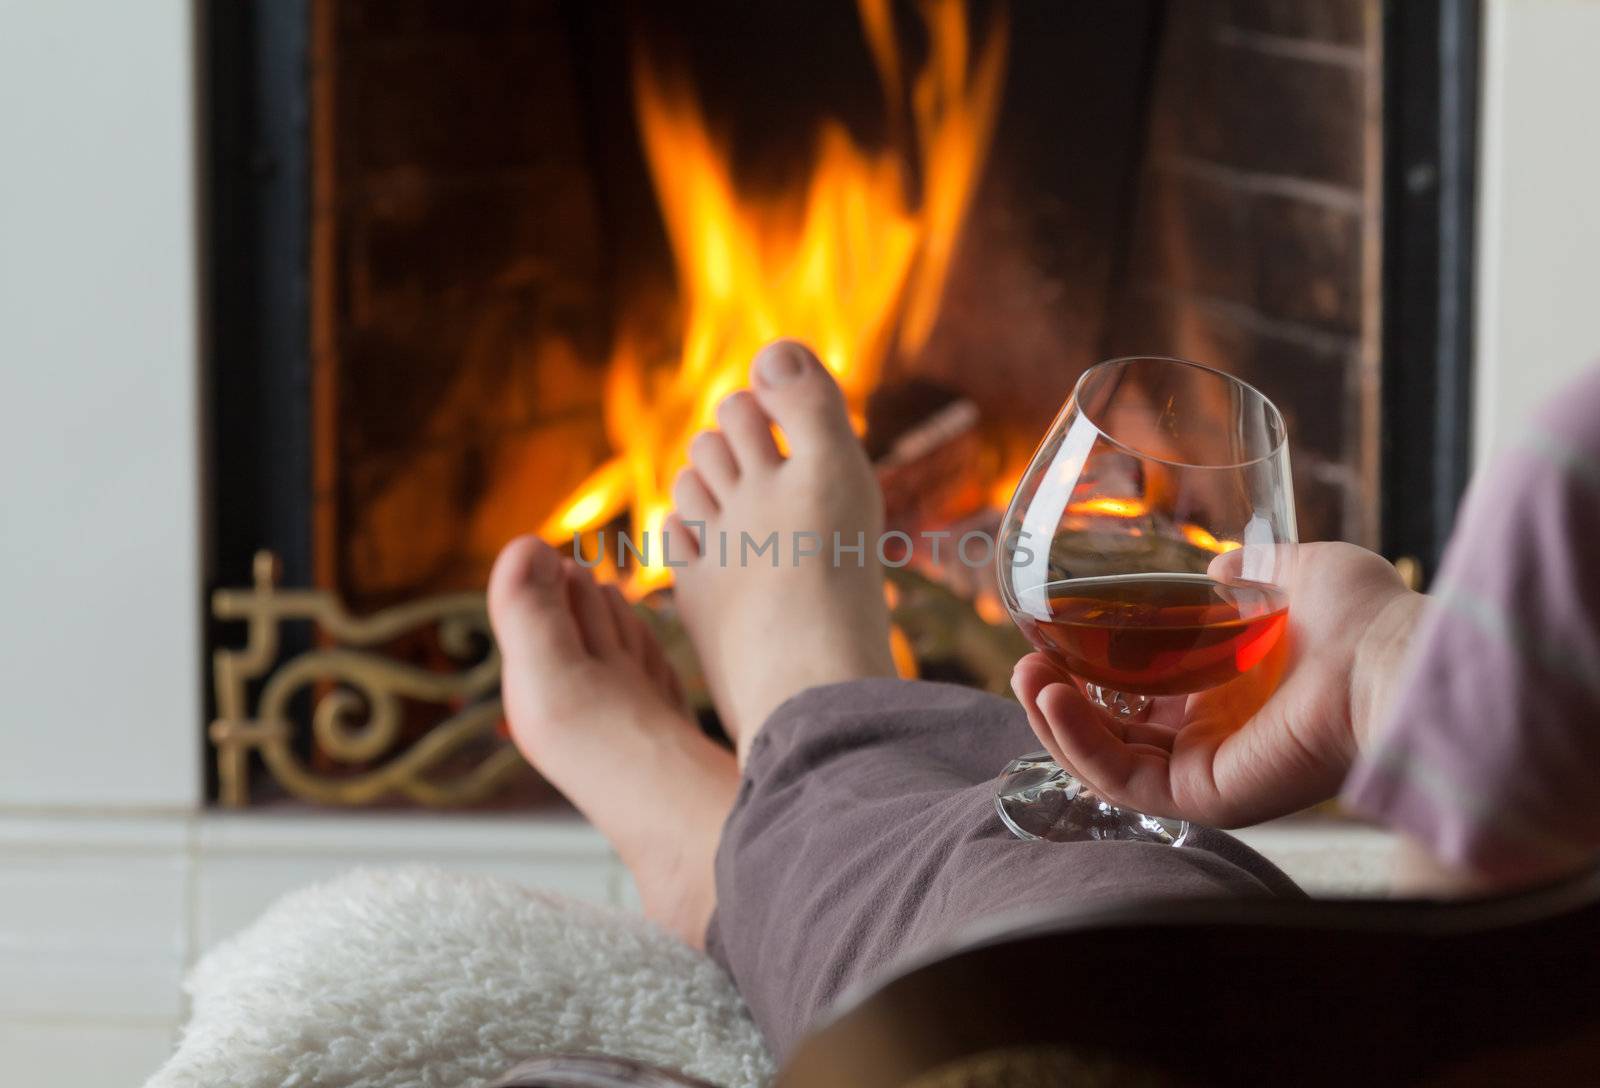 A glass of cognac on the background of a burning fireplace with a brass openwork lattice